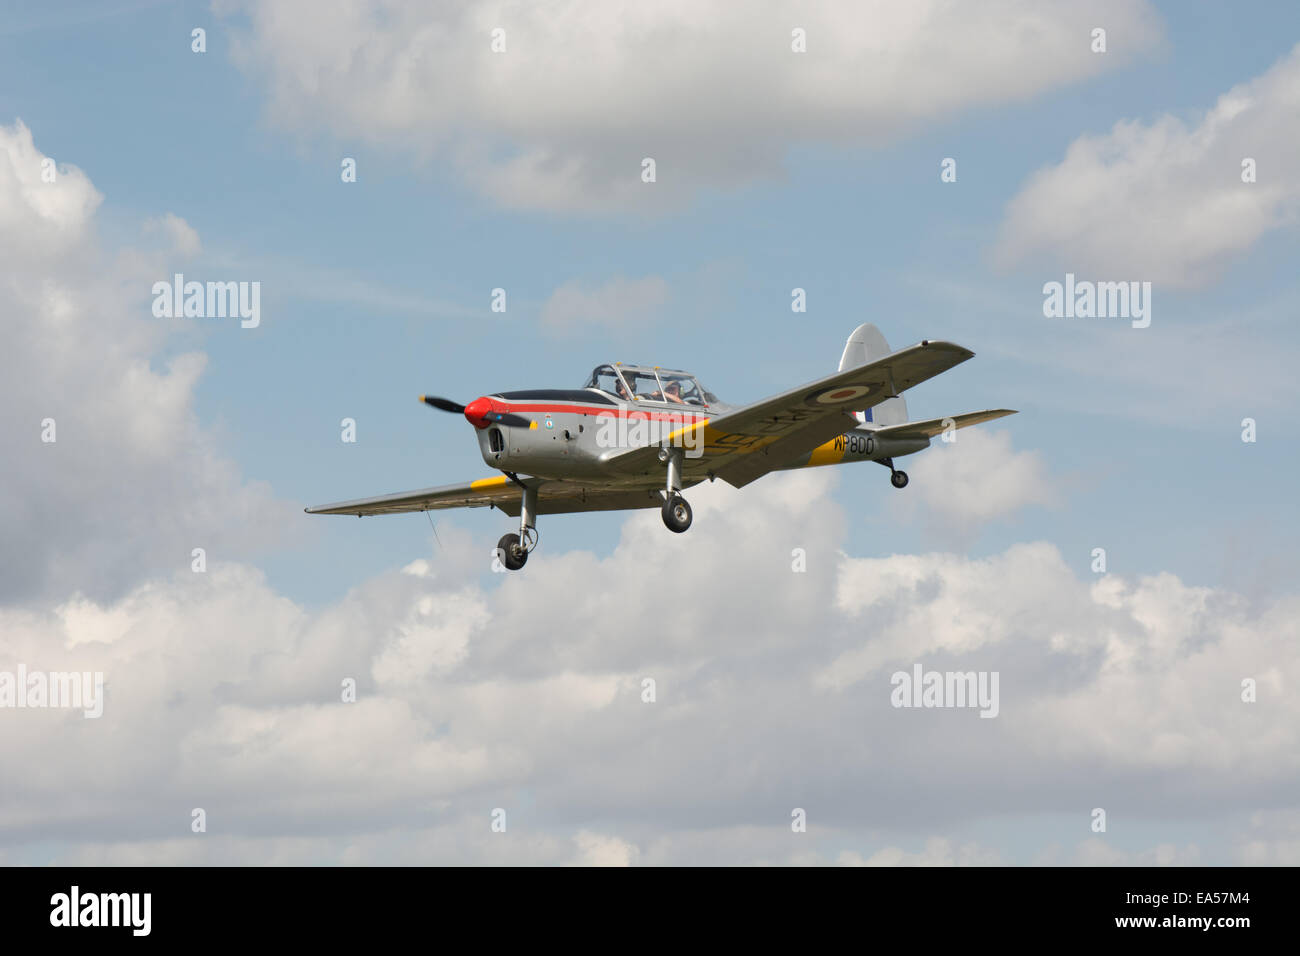 A former Royal Air Force De Havilland DHC-1 Chipmunk Mk22 WP800 makes it final approach before landing at an airfield in Essex. Stock Photo